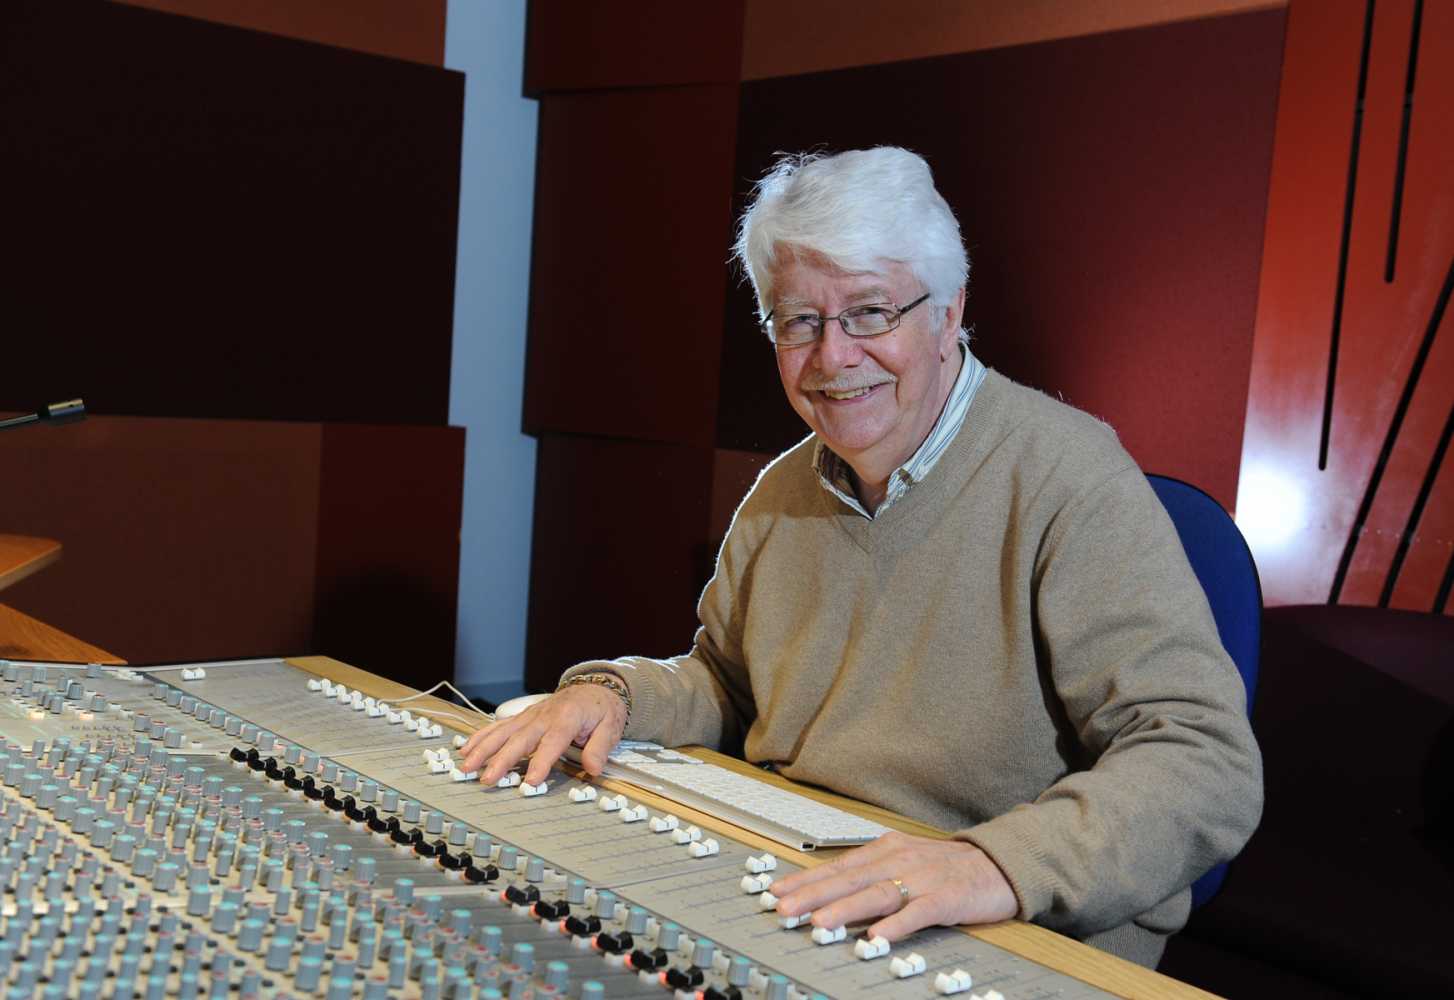 The course will be led by renowned producer and Leeds Beckett senior lecturer Ken Scott